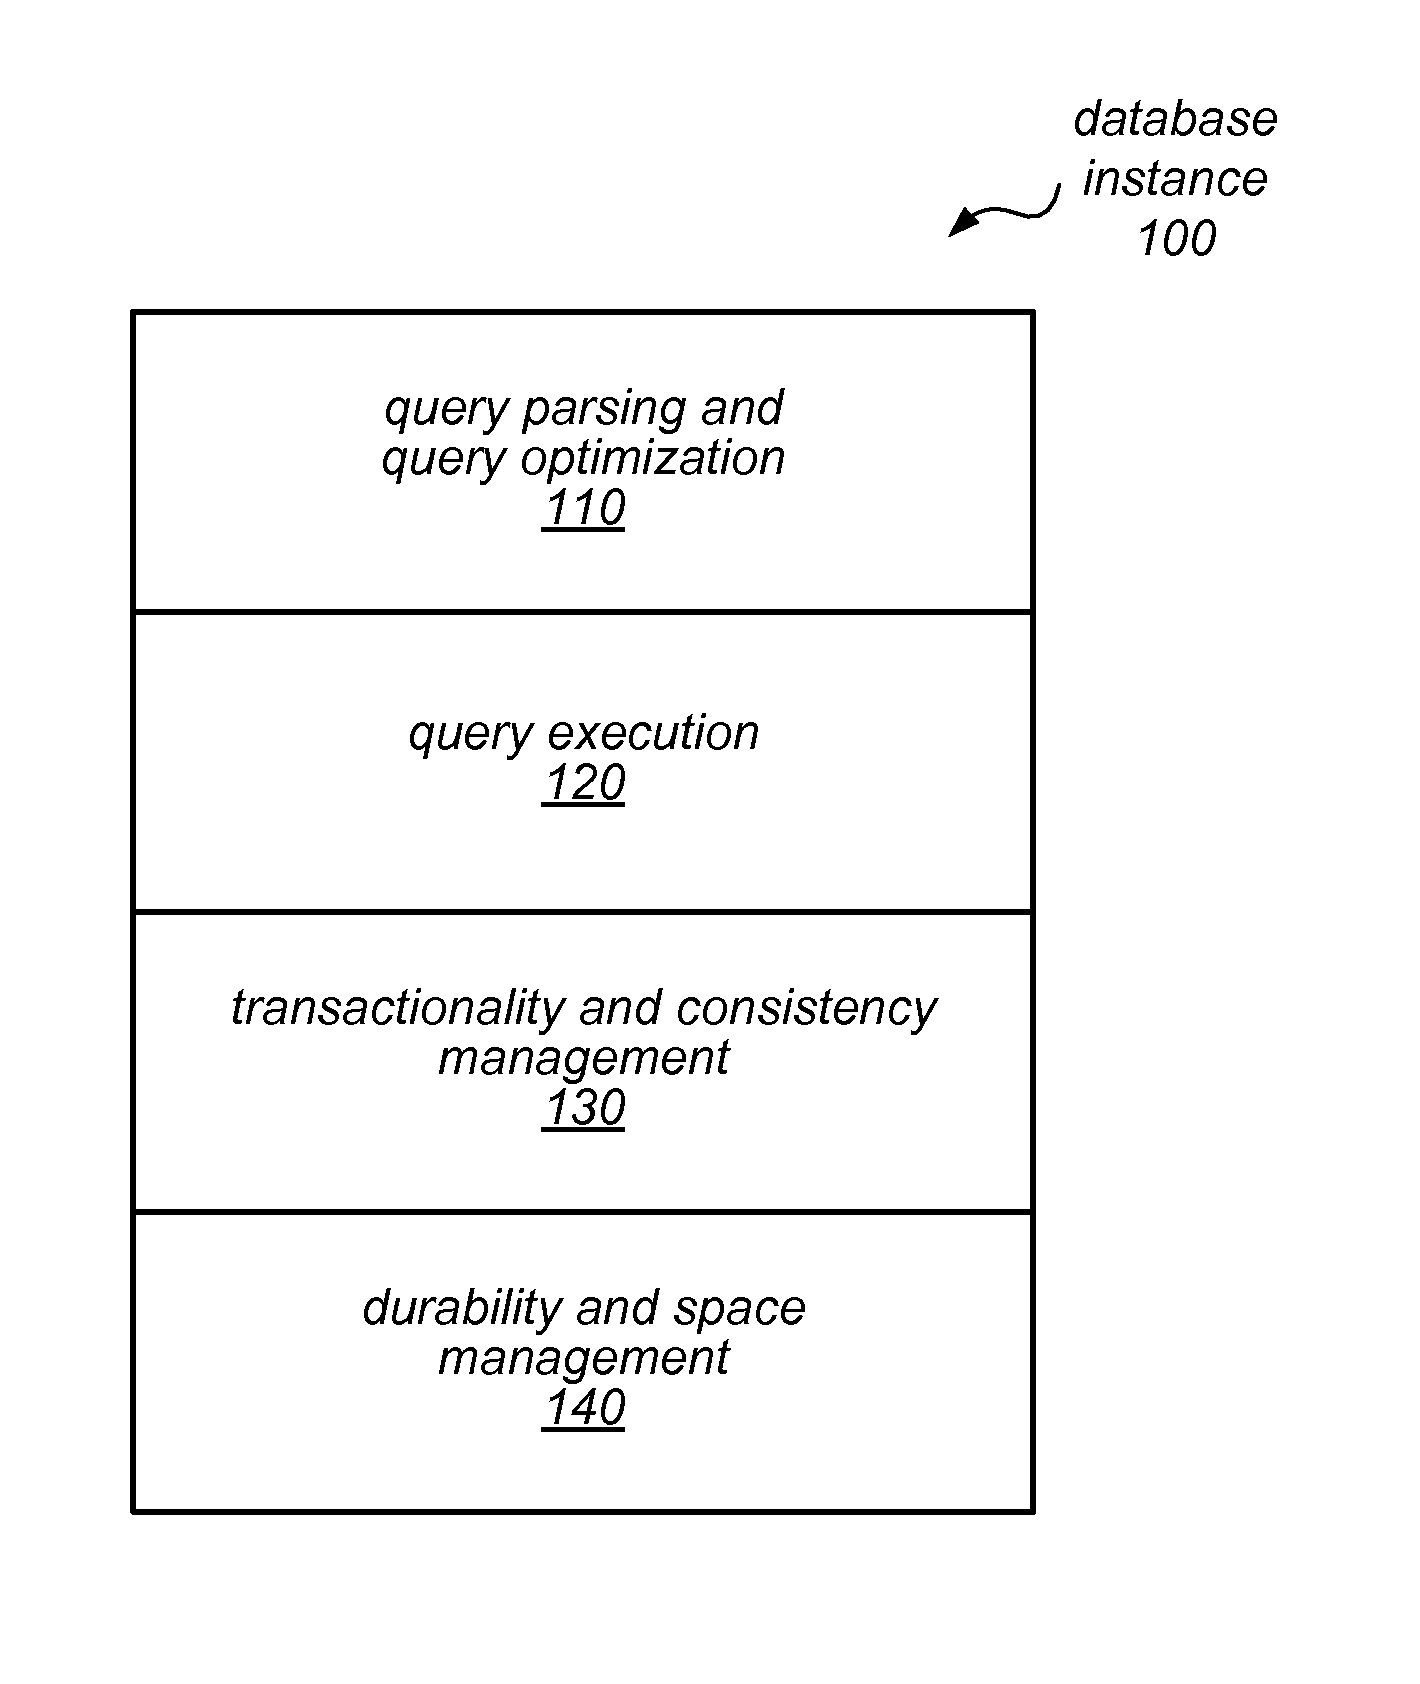 Database system with database engine and separate distributed storage service